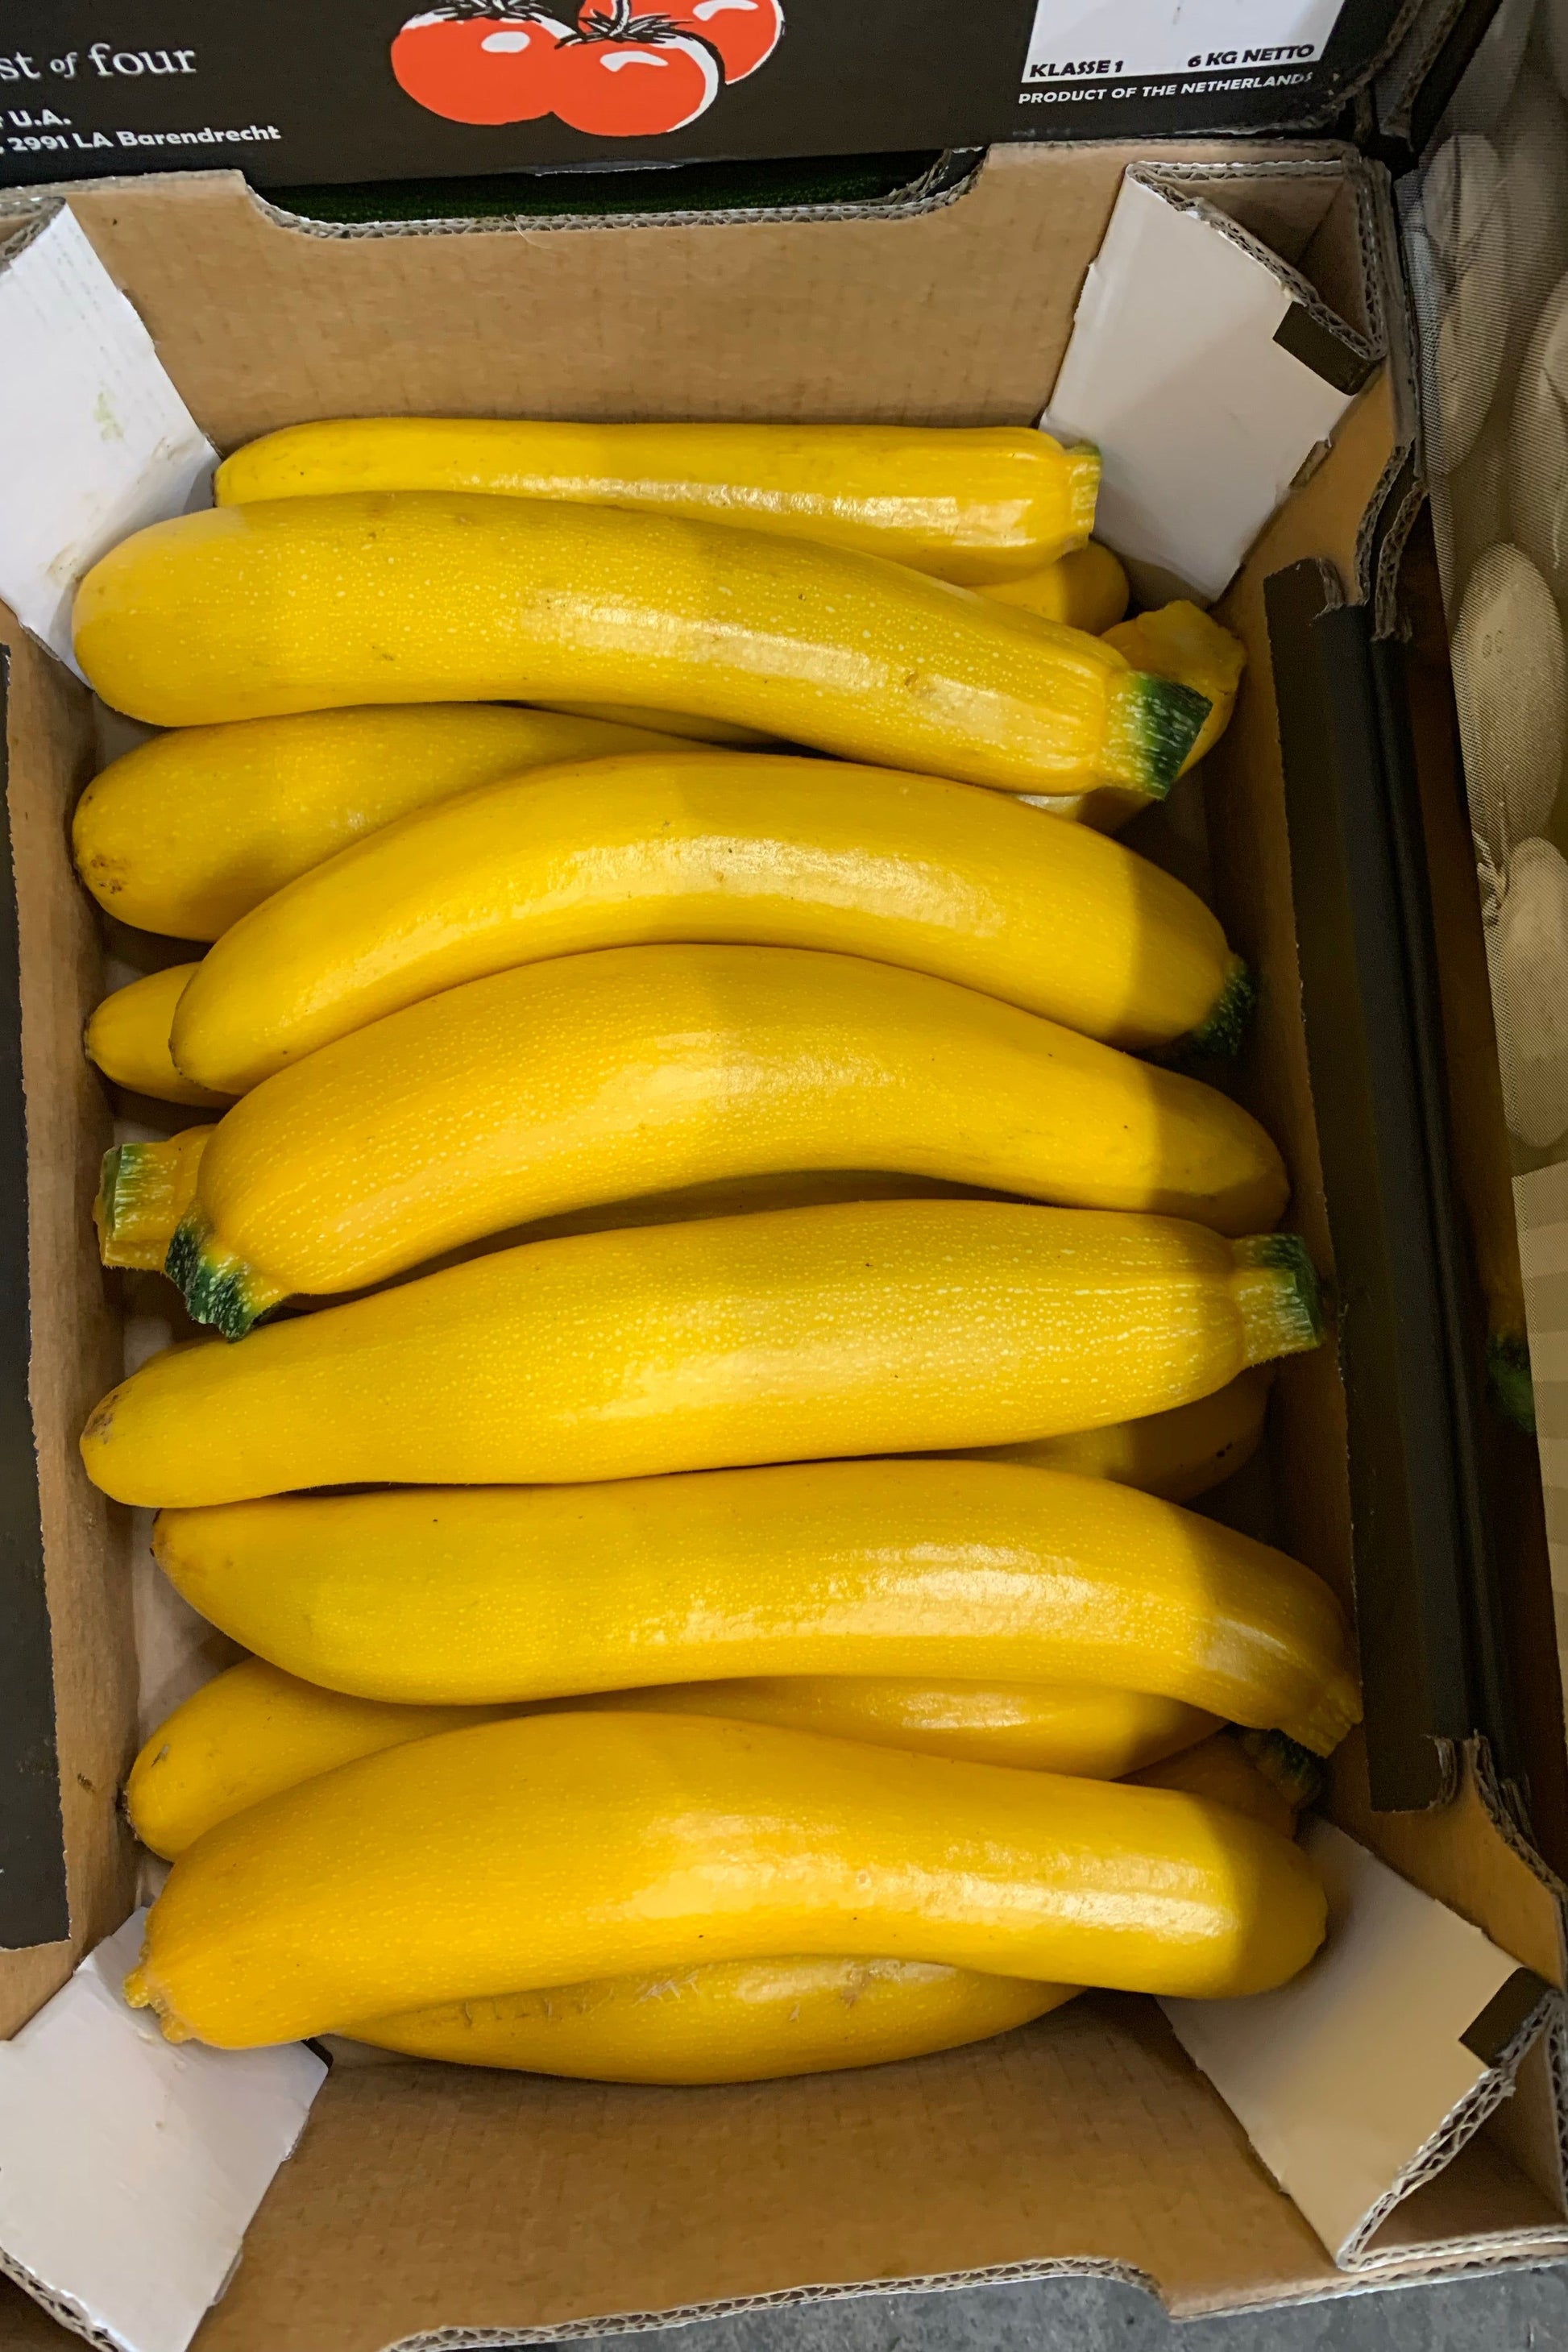 Courgette Yellow x5kg Box - Jackie Leonards